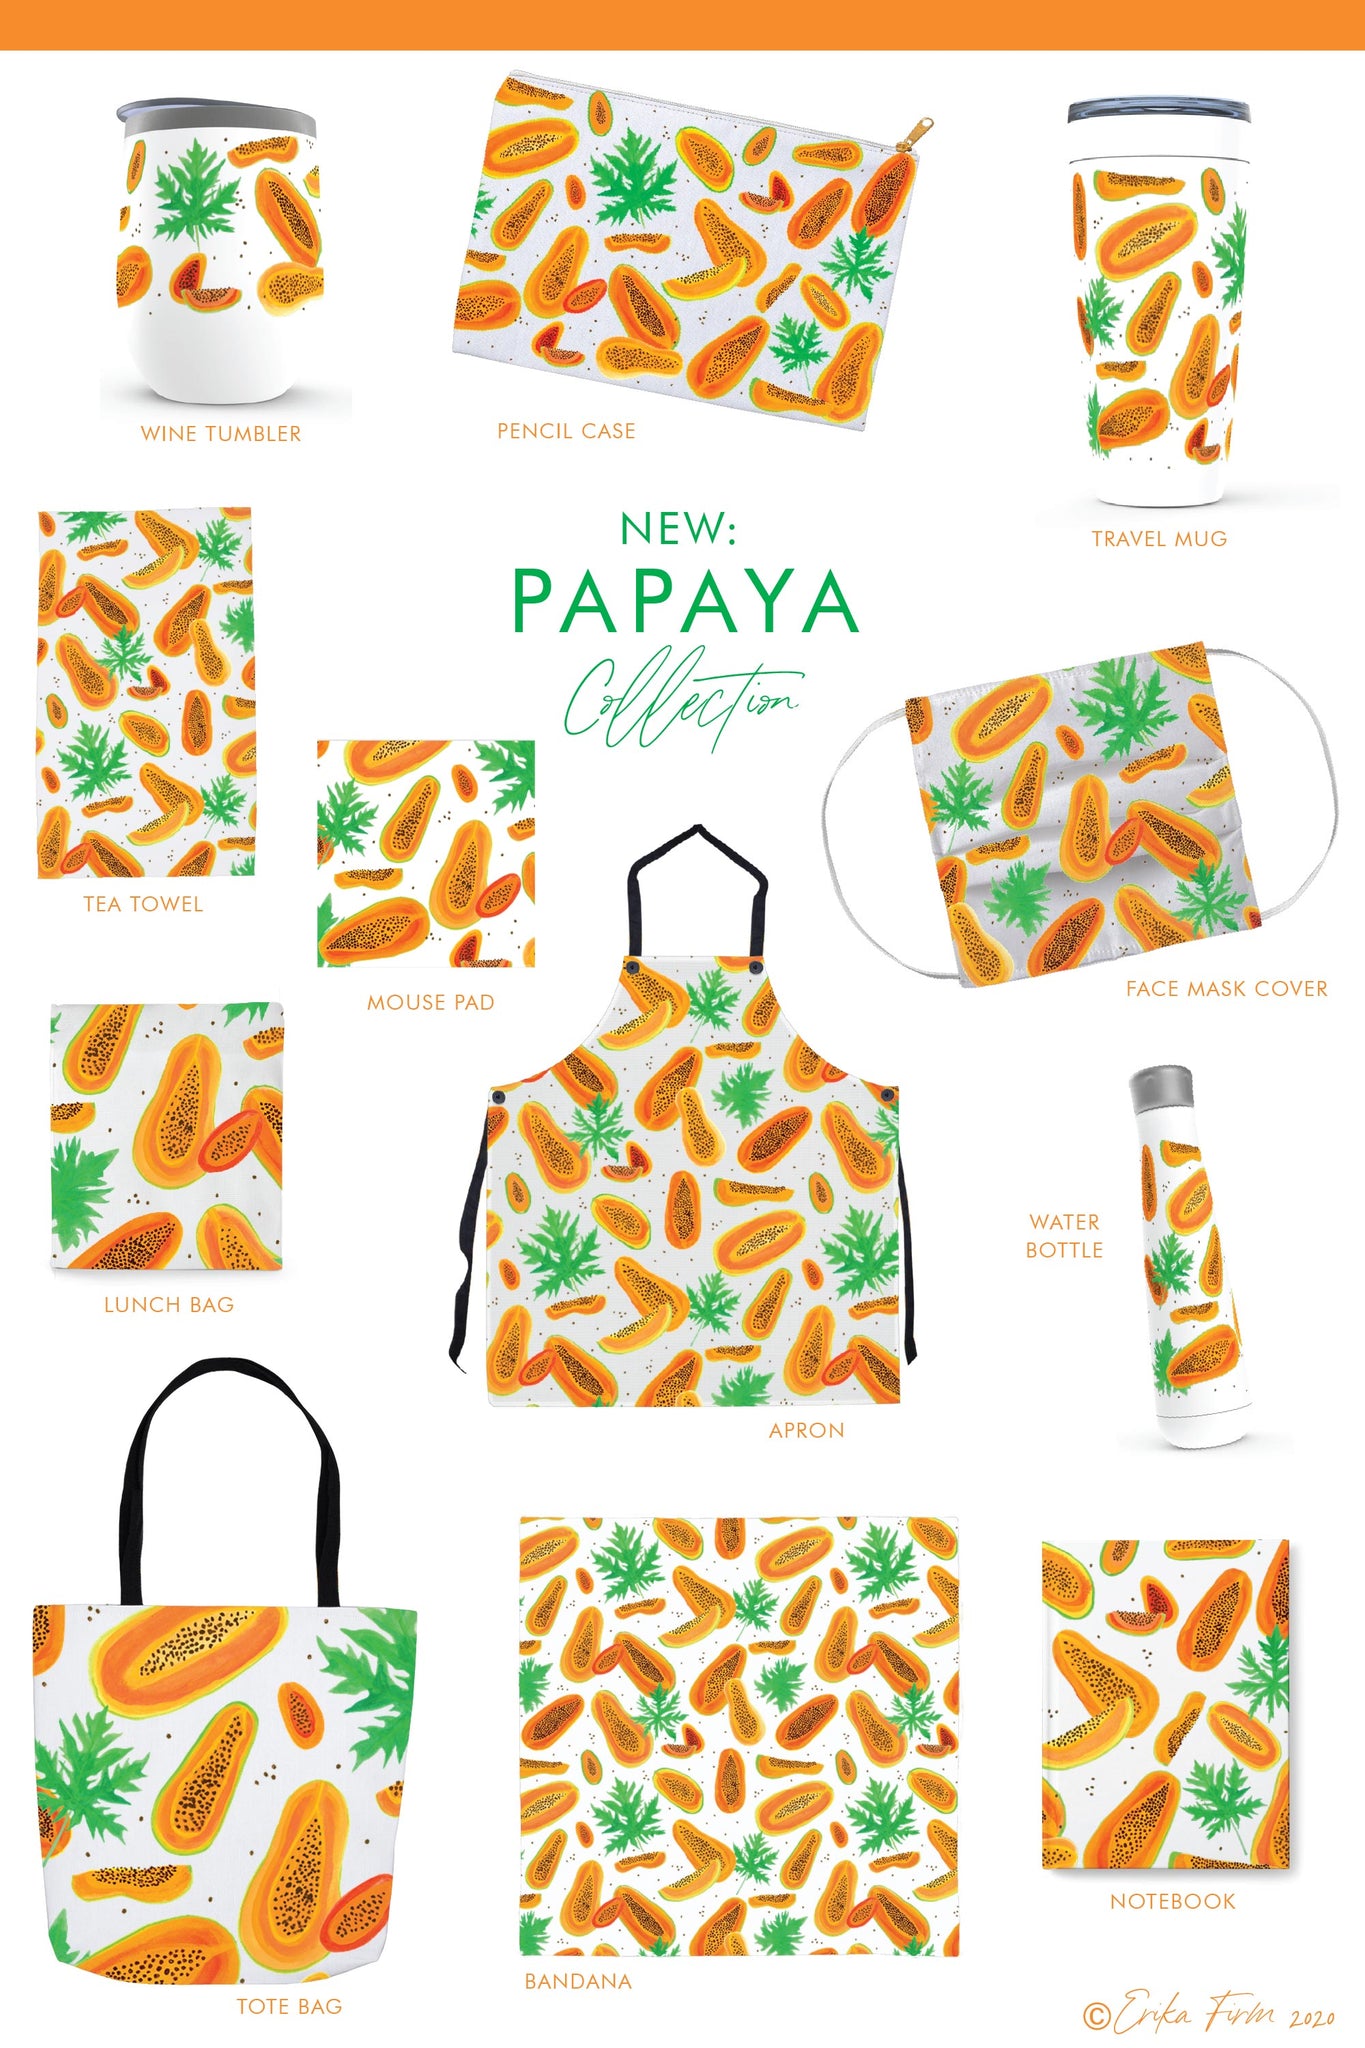 New Papaya Pattern Collection of face masks, tote bags, tea towels, aprons, notebooks, water bottles, travel mugs, and more, by South Carolina artist Erika Firm